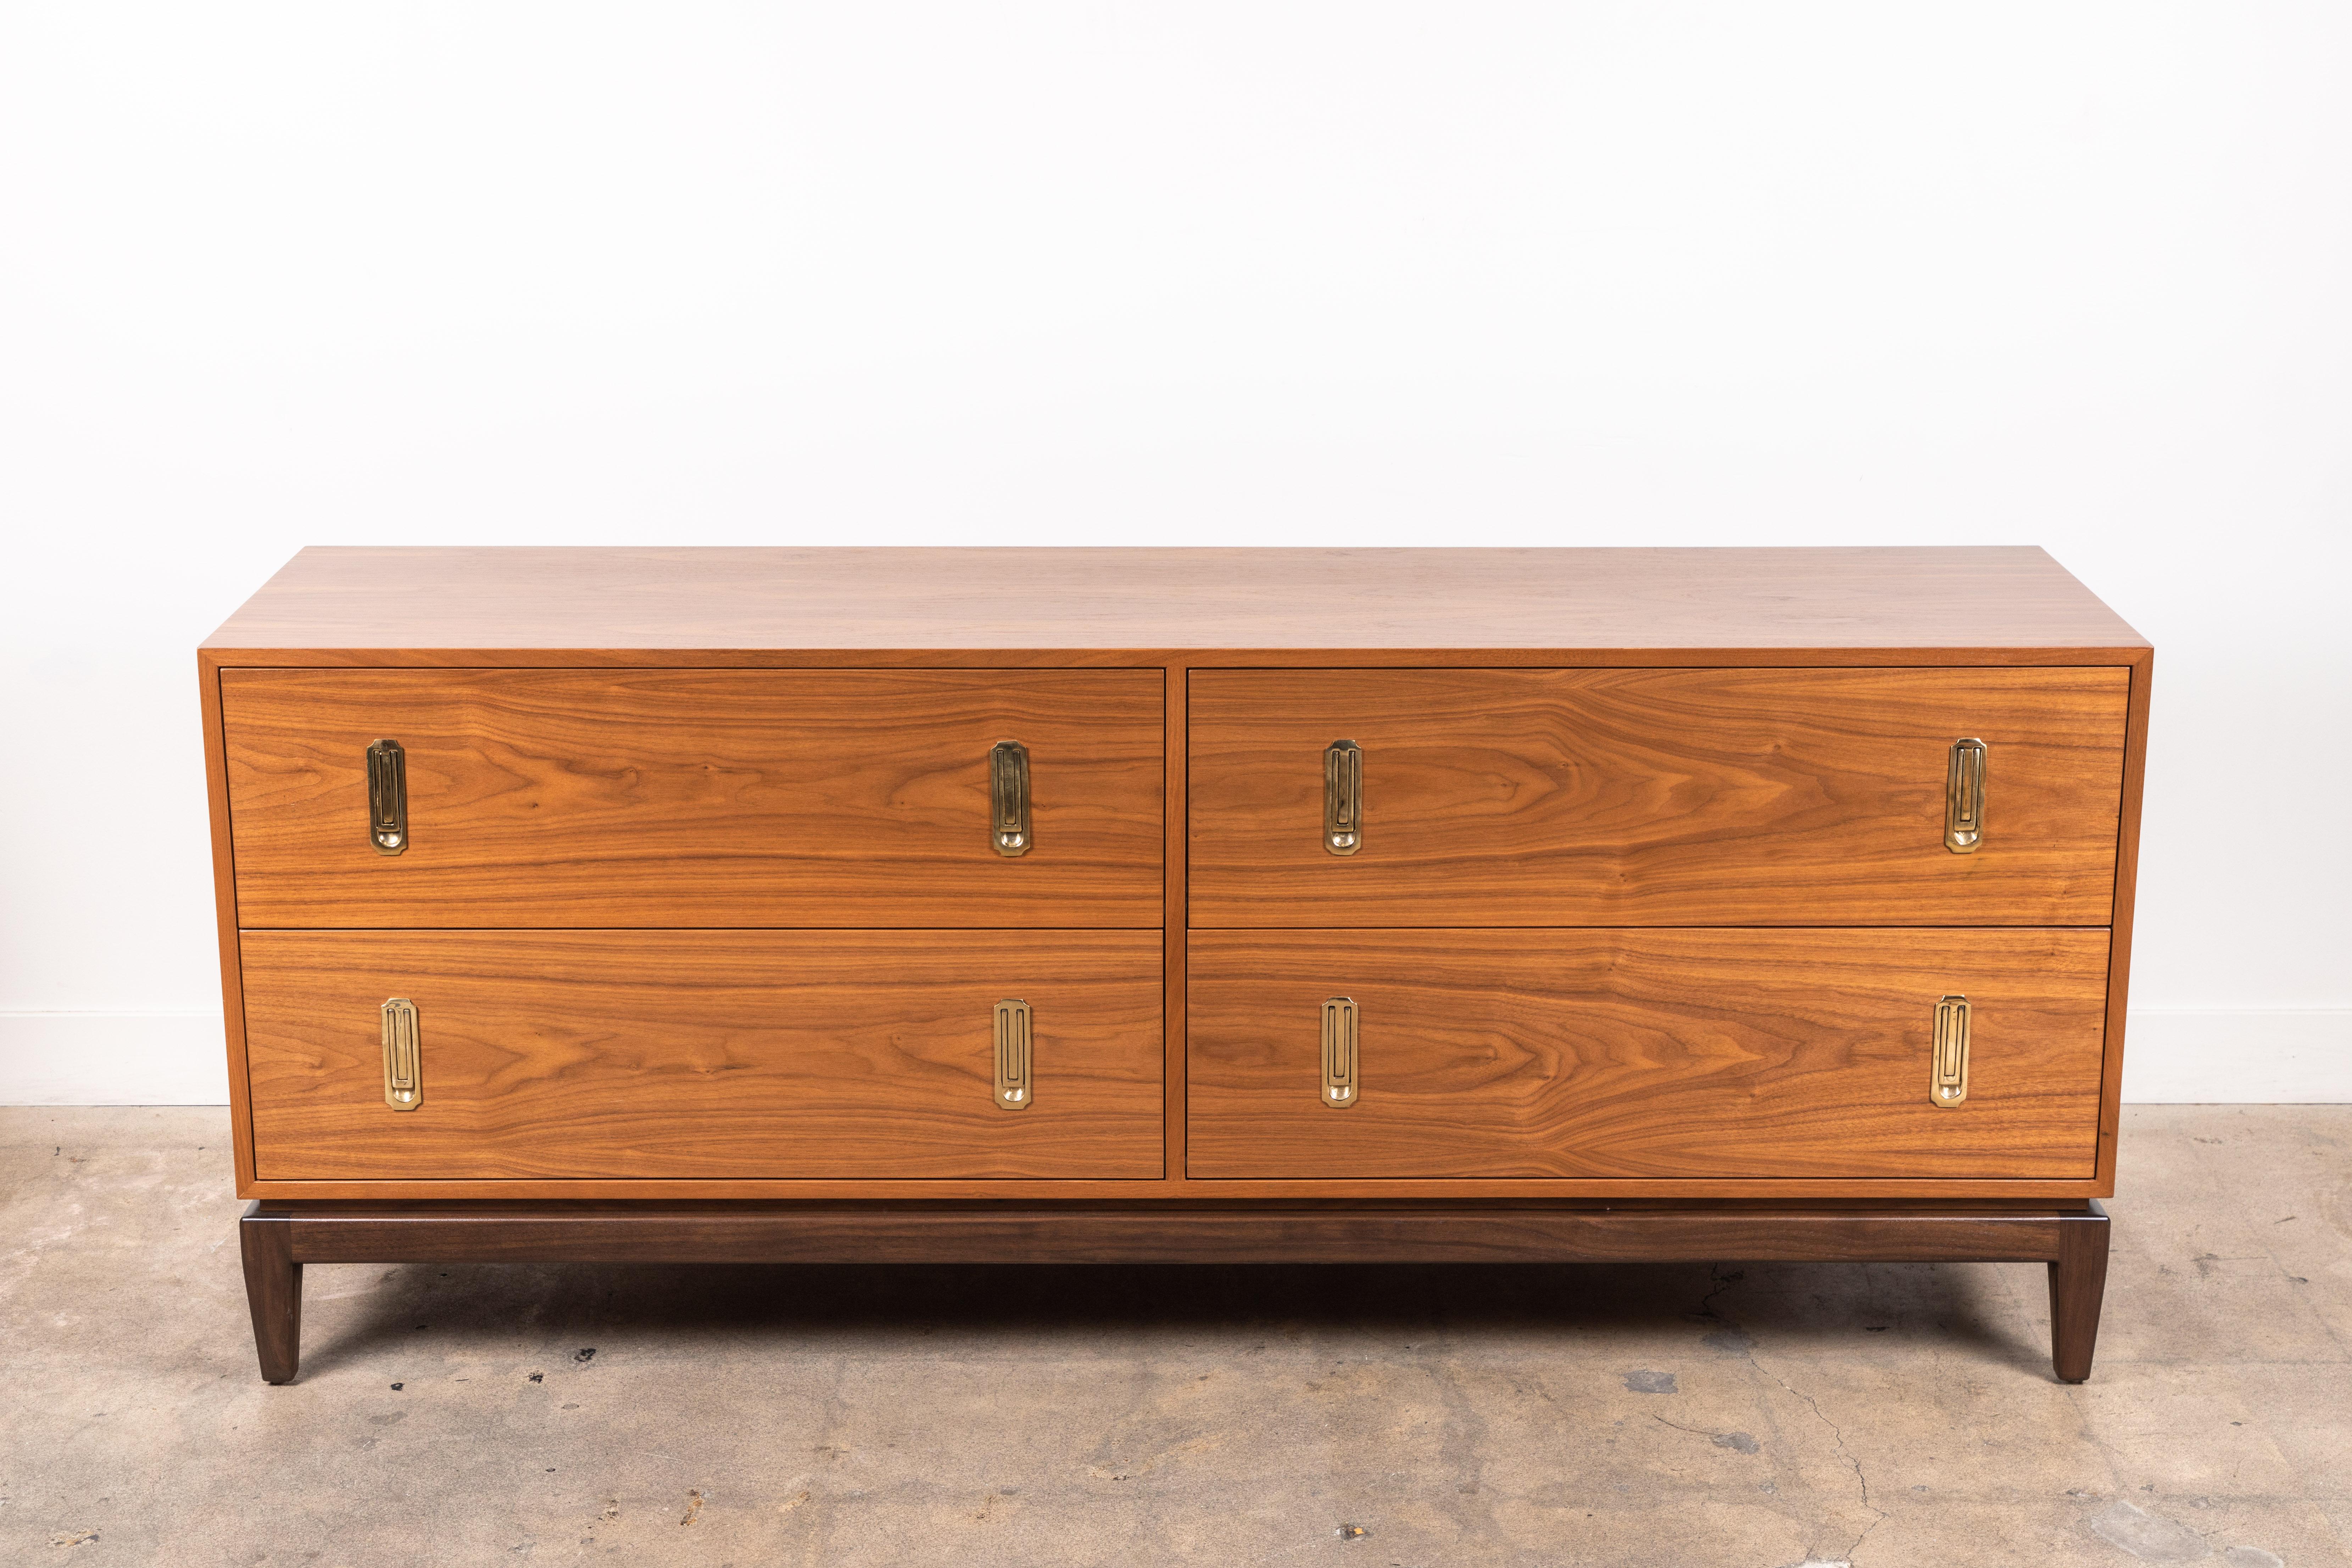 The 4-drawer Arcadia chest features four drawers, cast brass hardware, and a sculptural solid American walnut or white oak base. Shown here in light walnut with dark walnut base. 

Available to order in various finishes with a 10-12 week lead